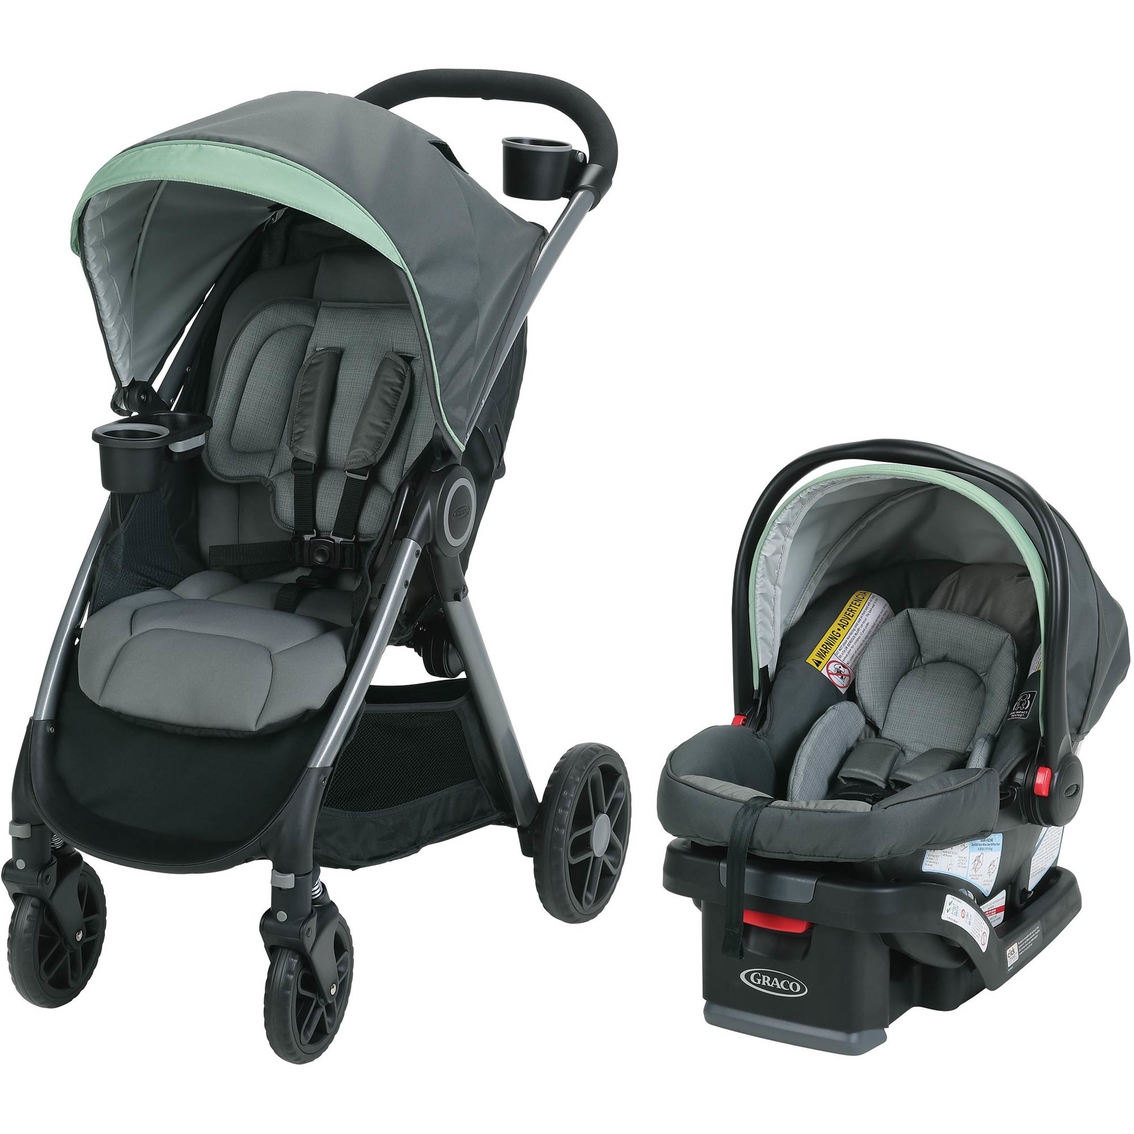 second hand travel system